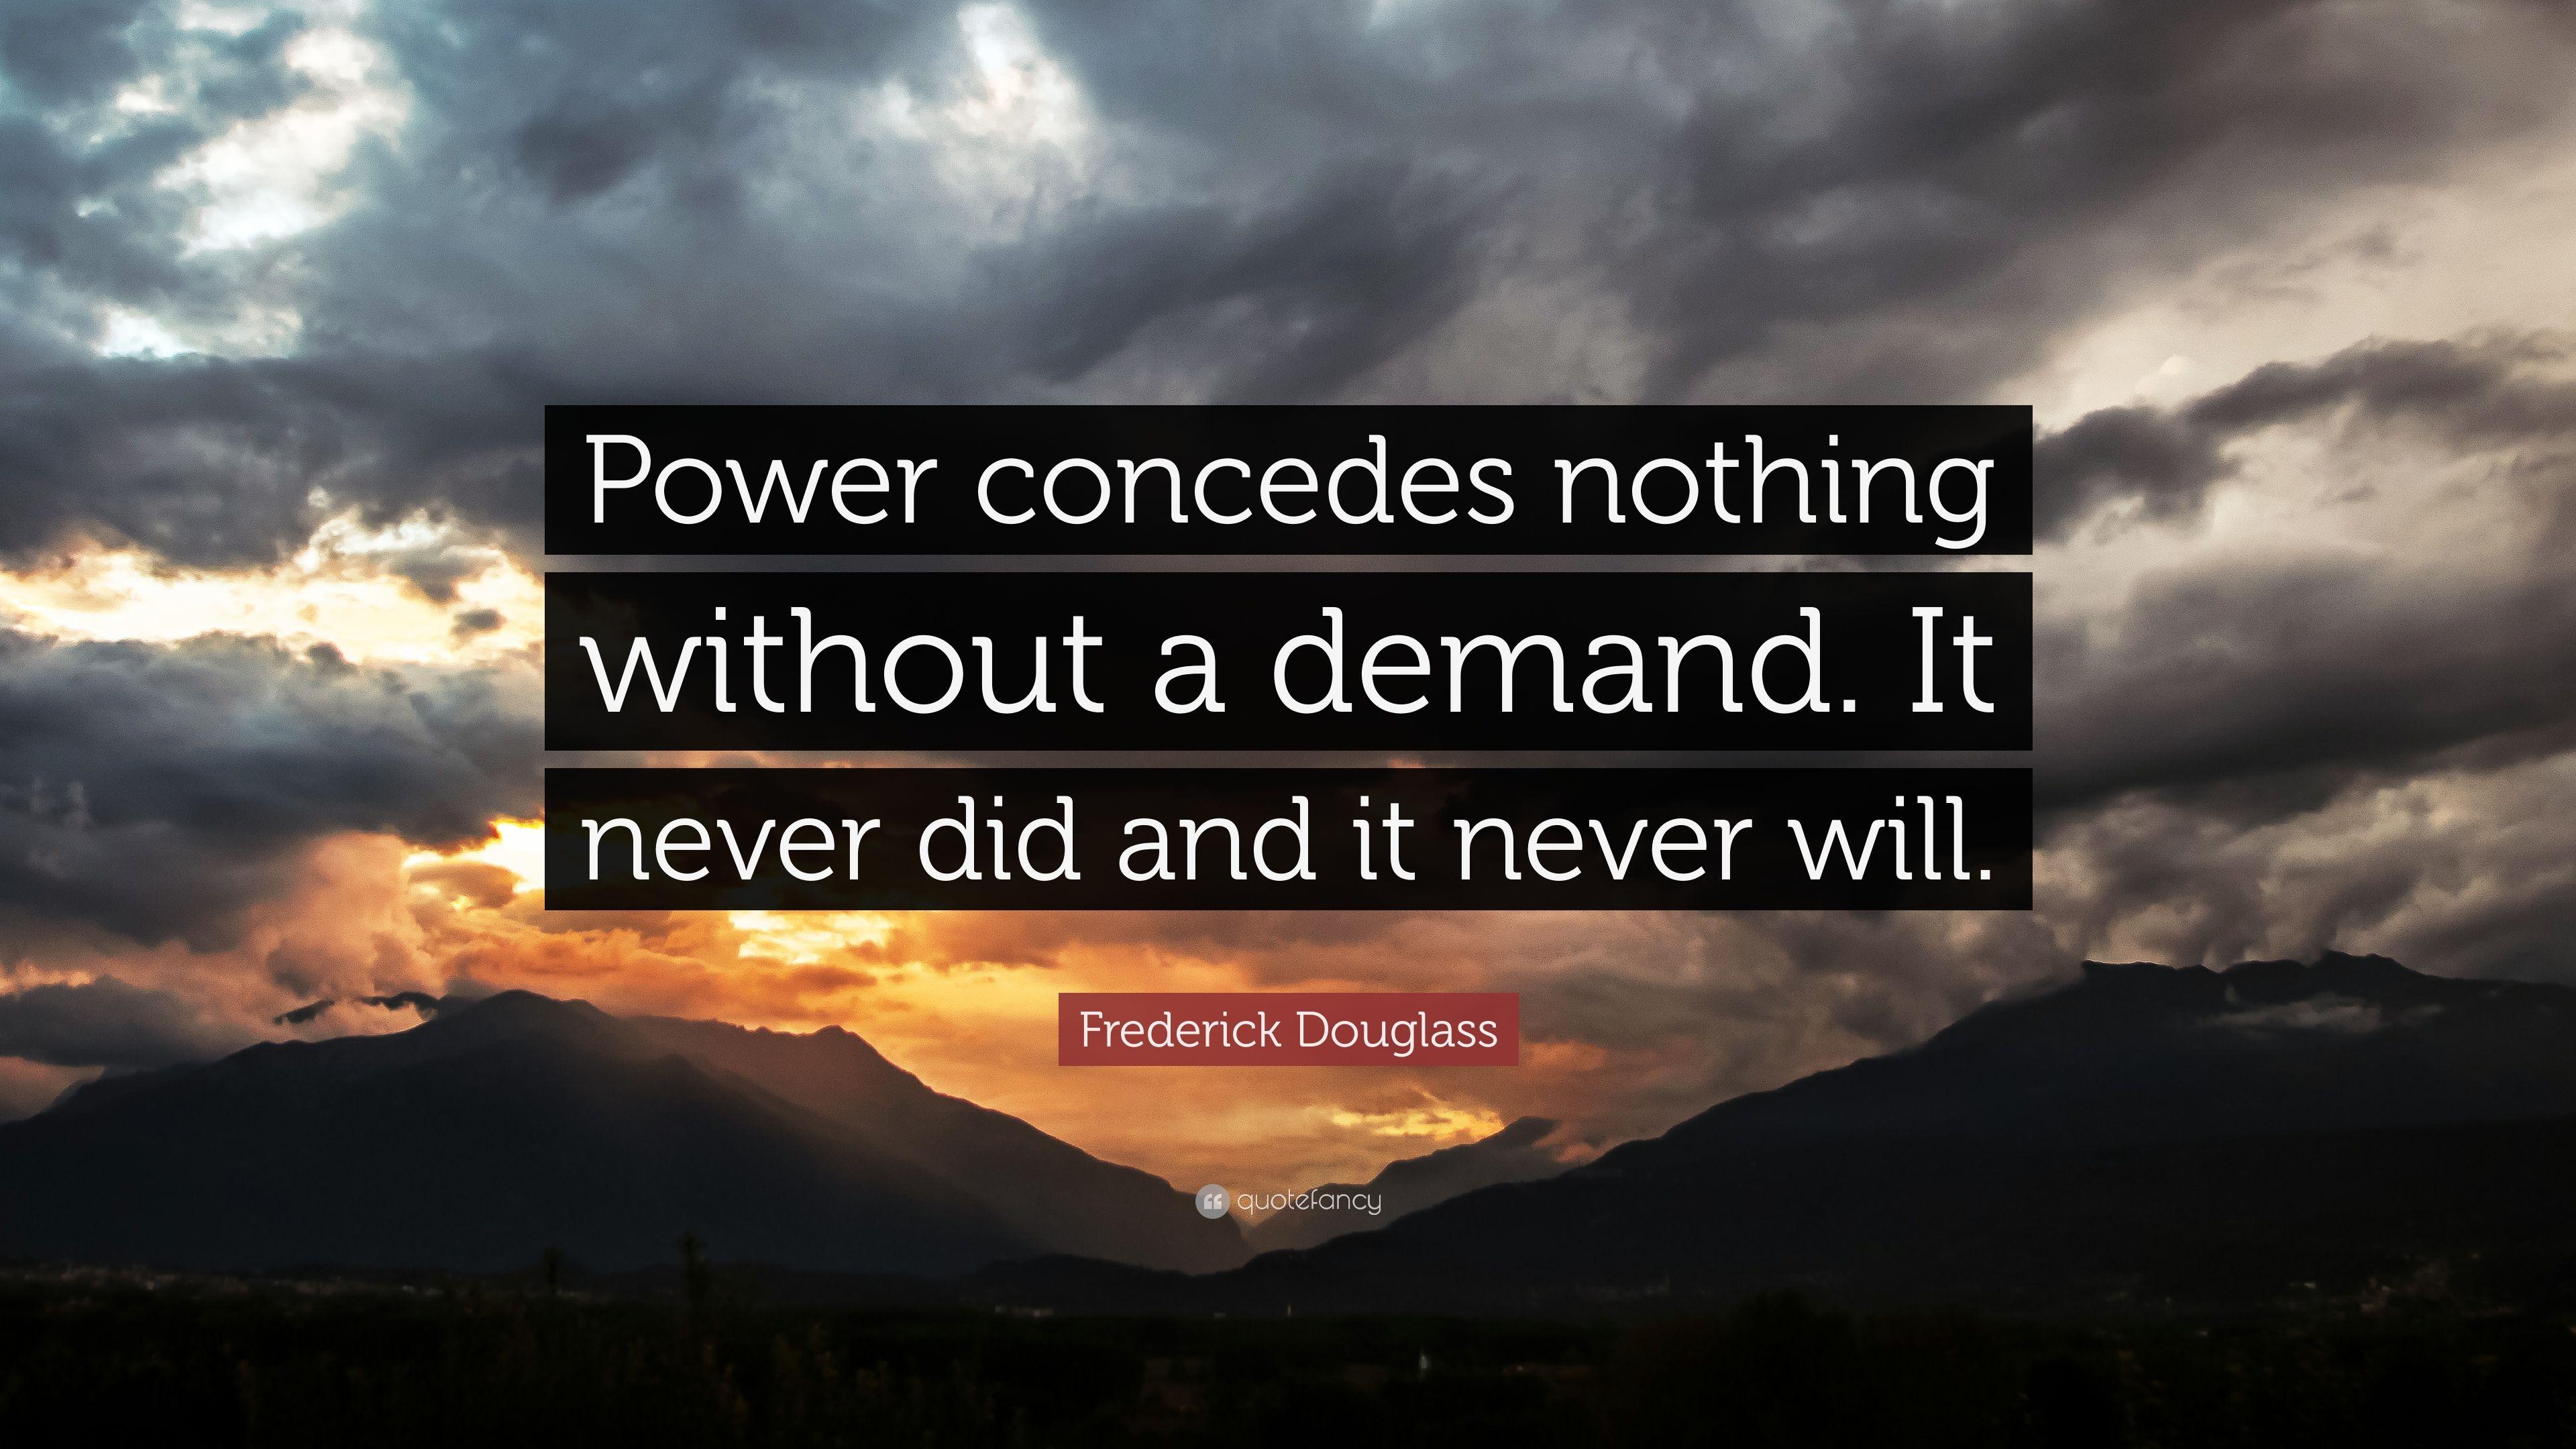 Frederick Douglass Quote: “Power concedes nothing without a demand